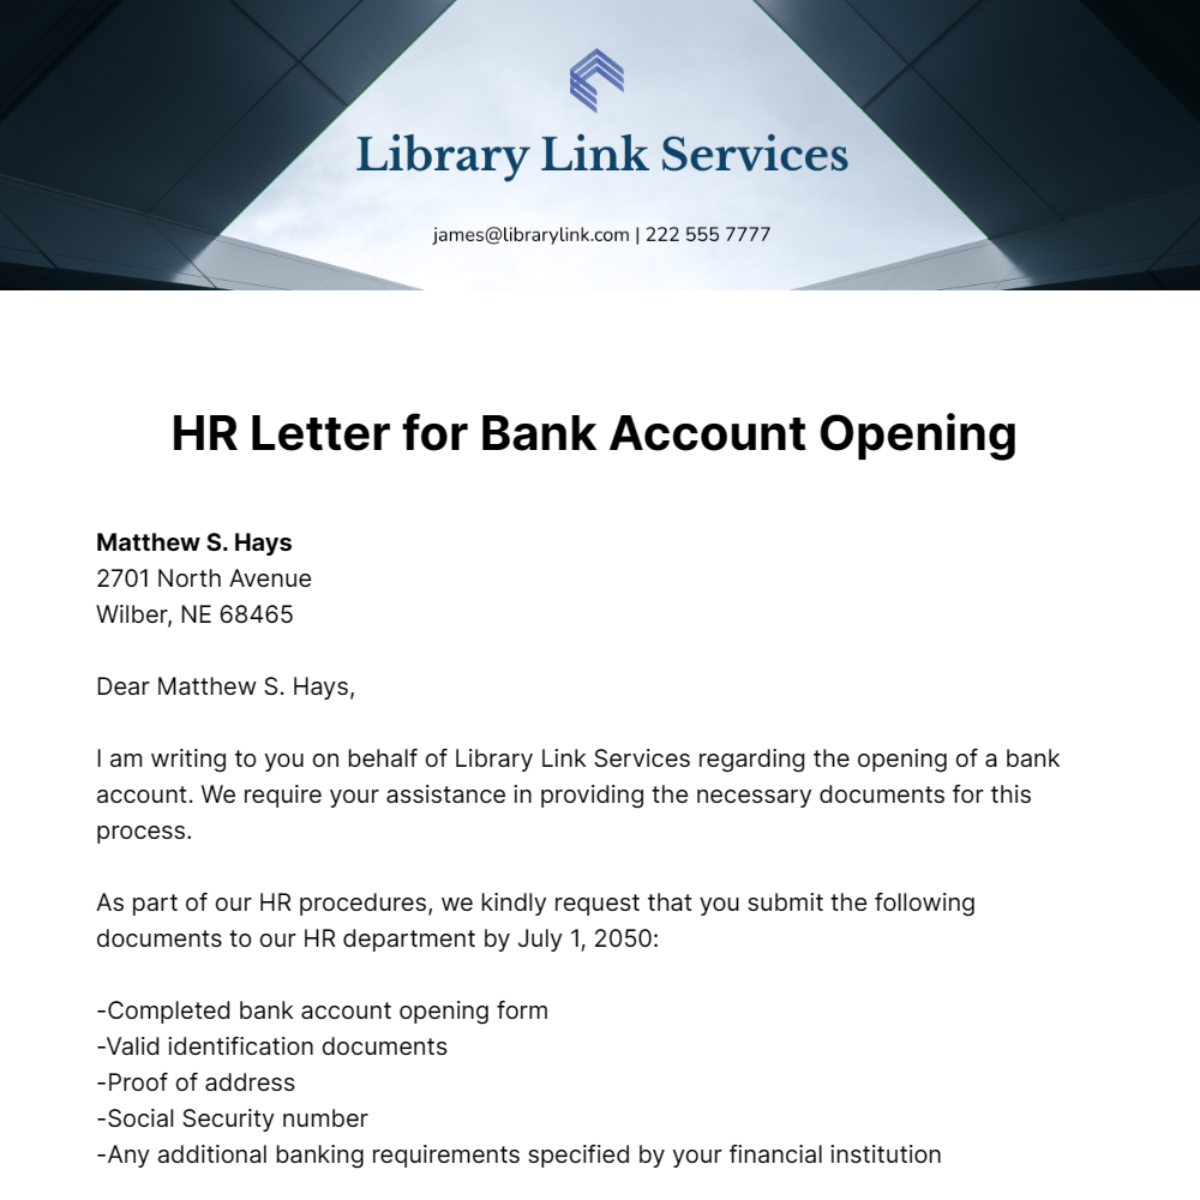 HR Letter for Bank Account Opening Template